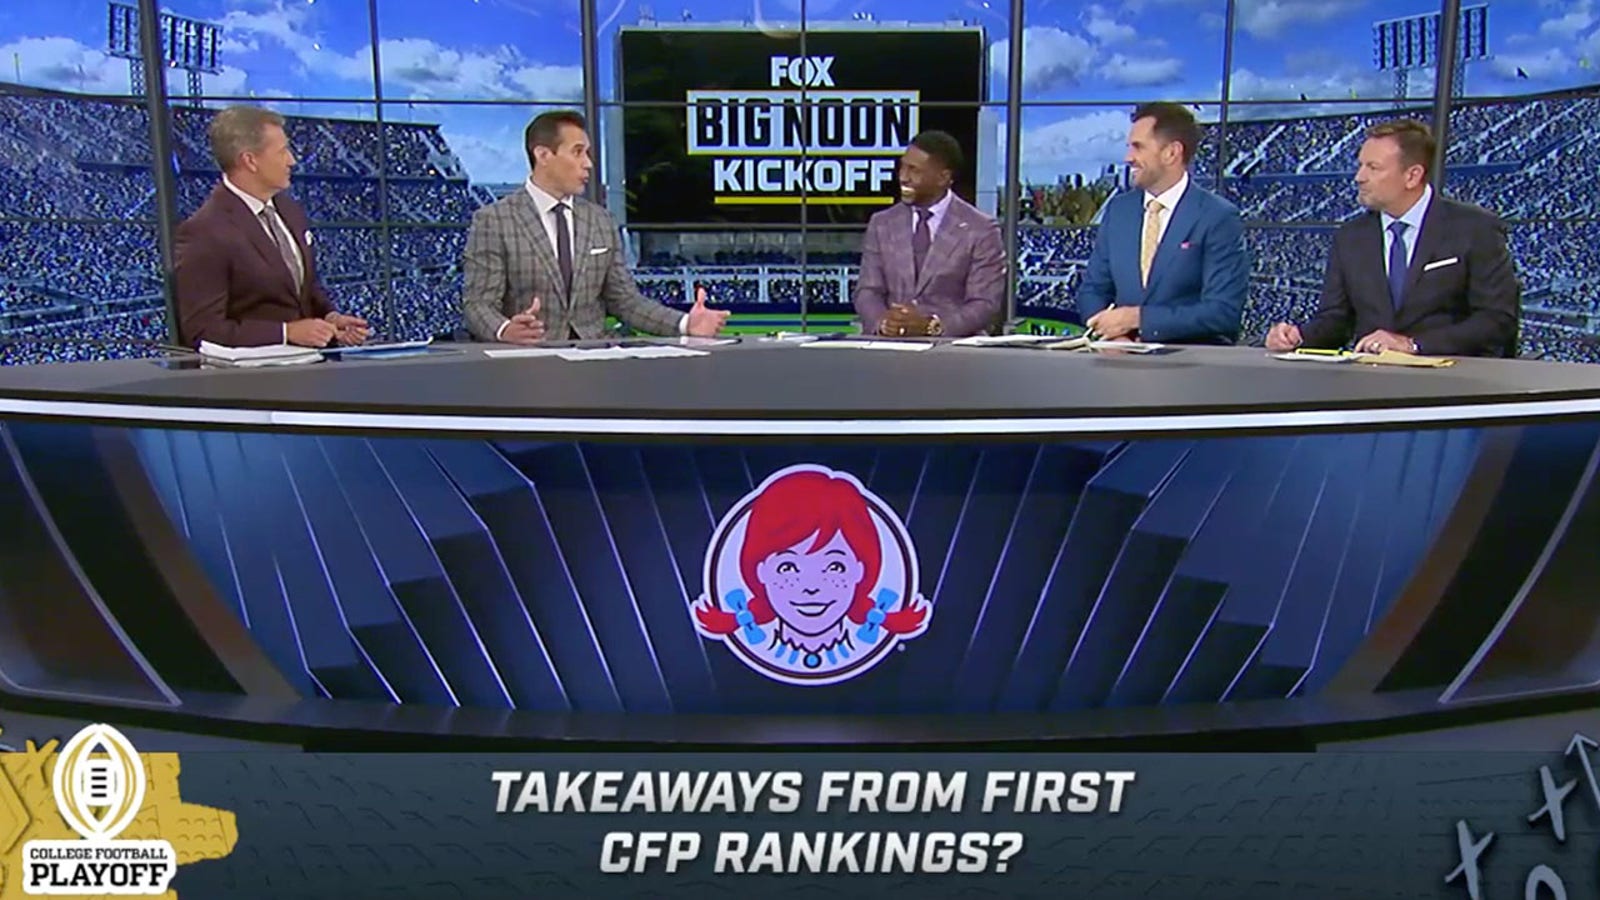 'We have a system that was flawed to begin with' - The 'Big Noon Kickoff' crew reacts to the first College Football Playoff rankings